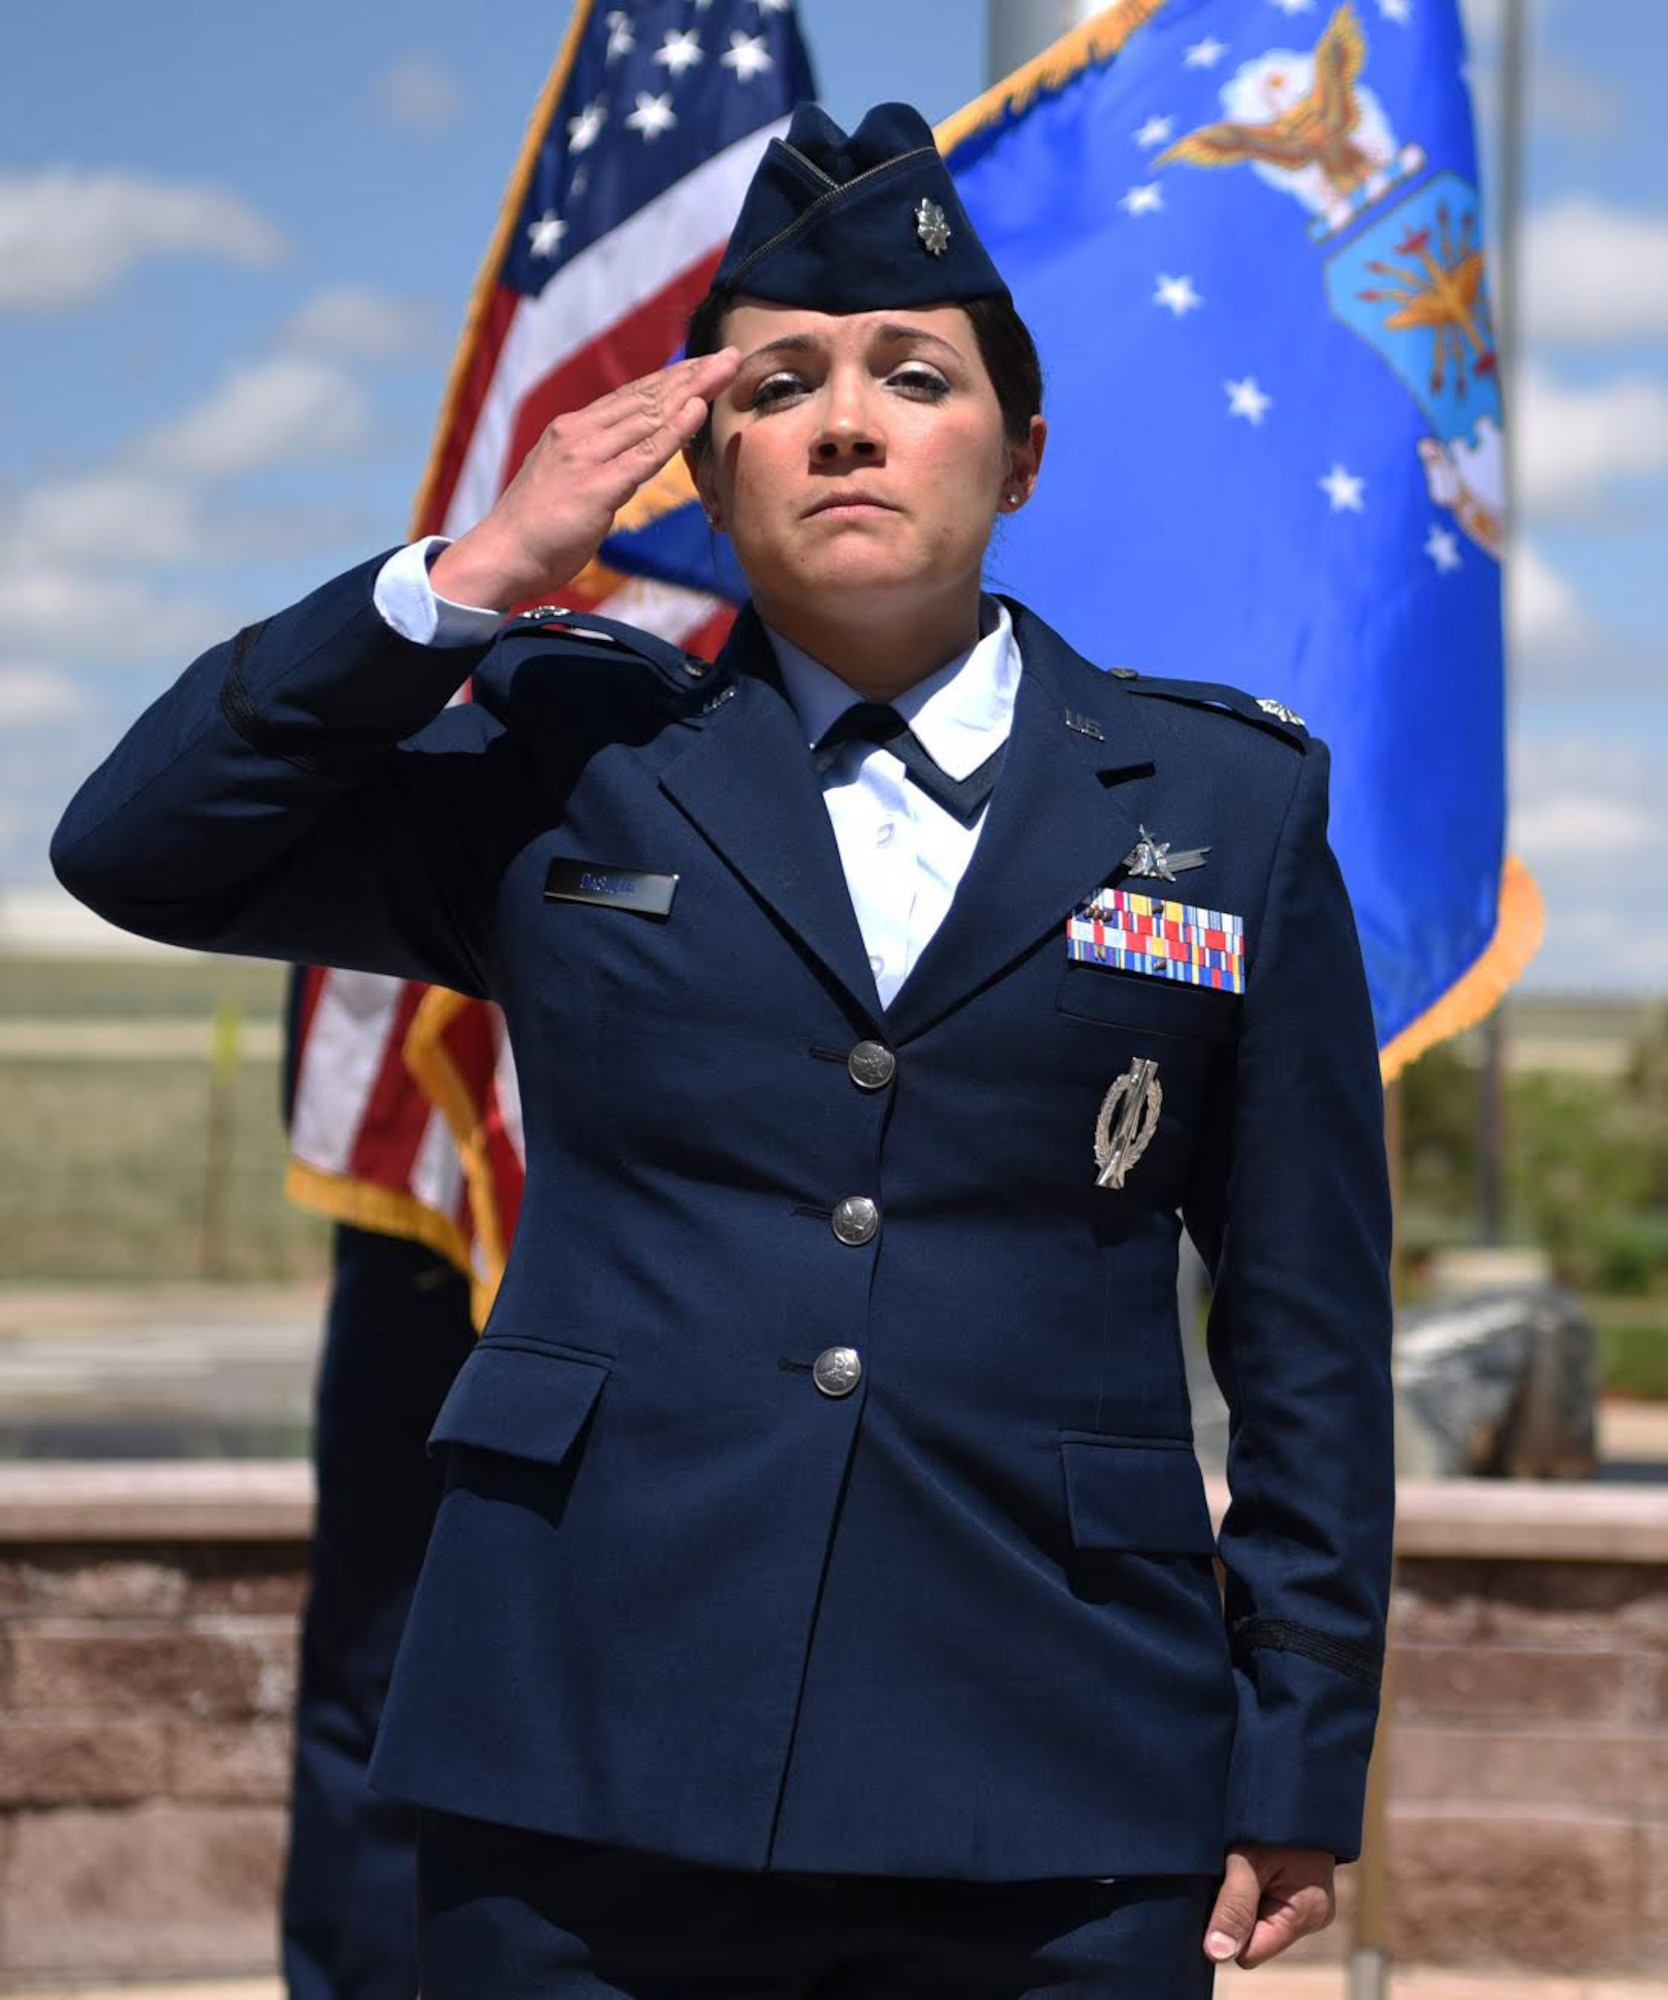 Lt. Col. Shannon DaSilva, 2nd Space Warning Squadron commander, renders the first salute to her new squadron May 11, 2017, on Buckley Air Force Base, Colo. Shannon is now responsible for the primary operations unit within the 460th OG, which continues to operate a more than 40-year-old, $3.2 billion on-orbit Defense Support Program satellite constellation. (U.S. Air Force photo by Airman 1st Class Holden S. Faul/Released)